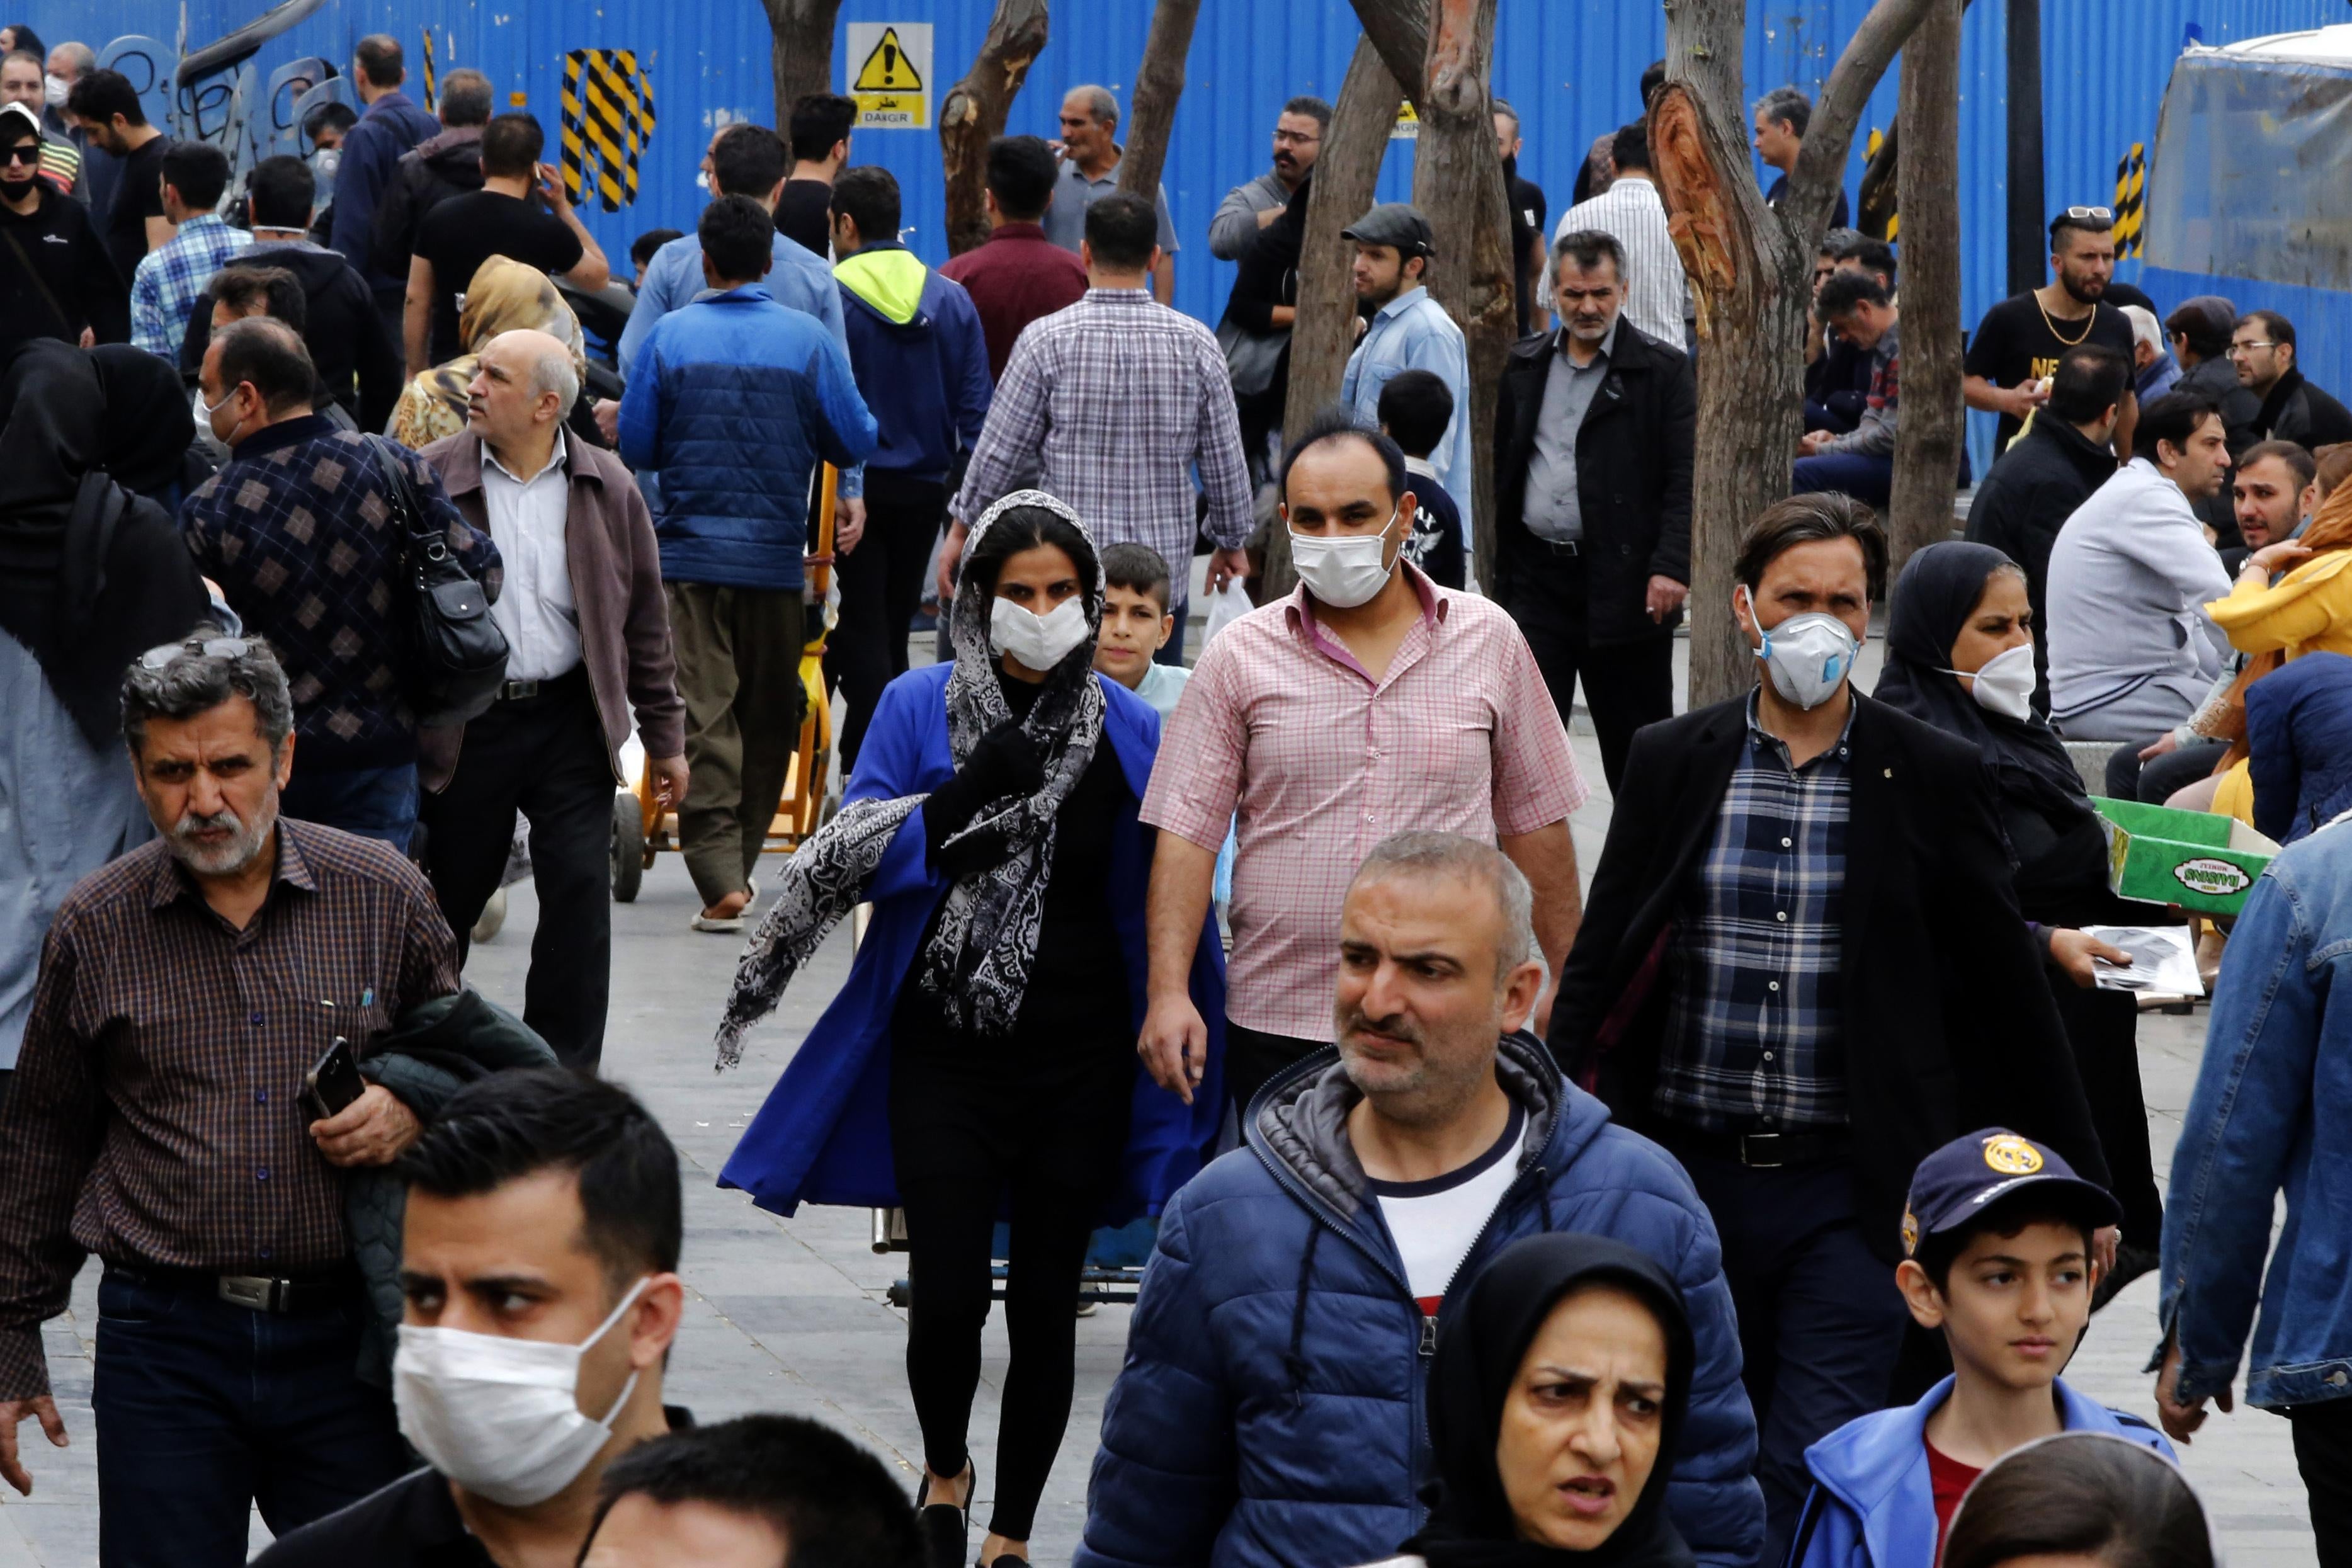 Iranians, some wearing protective masks, walk down the street in Tehran.